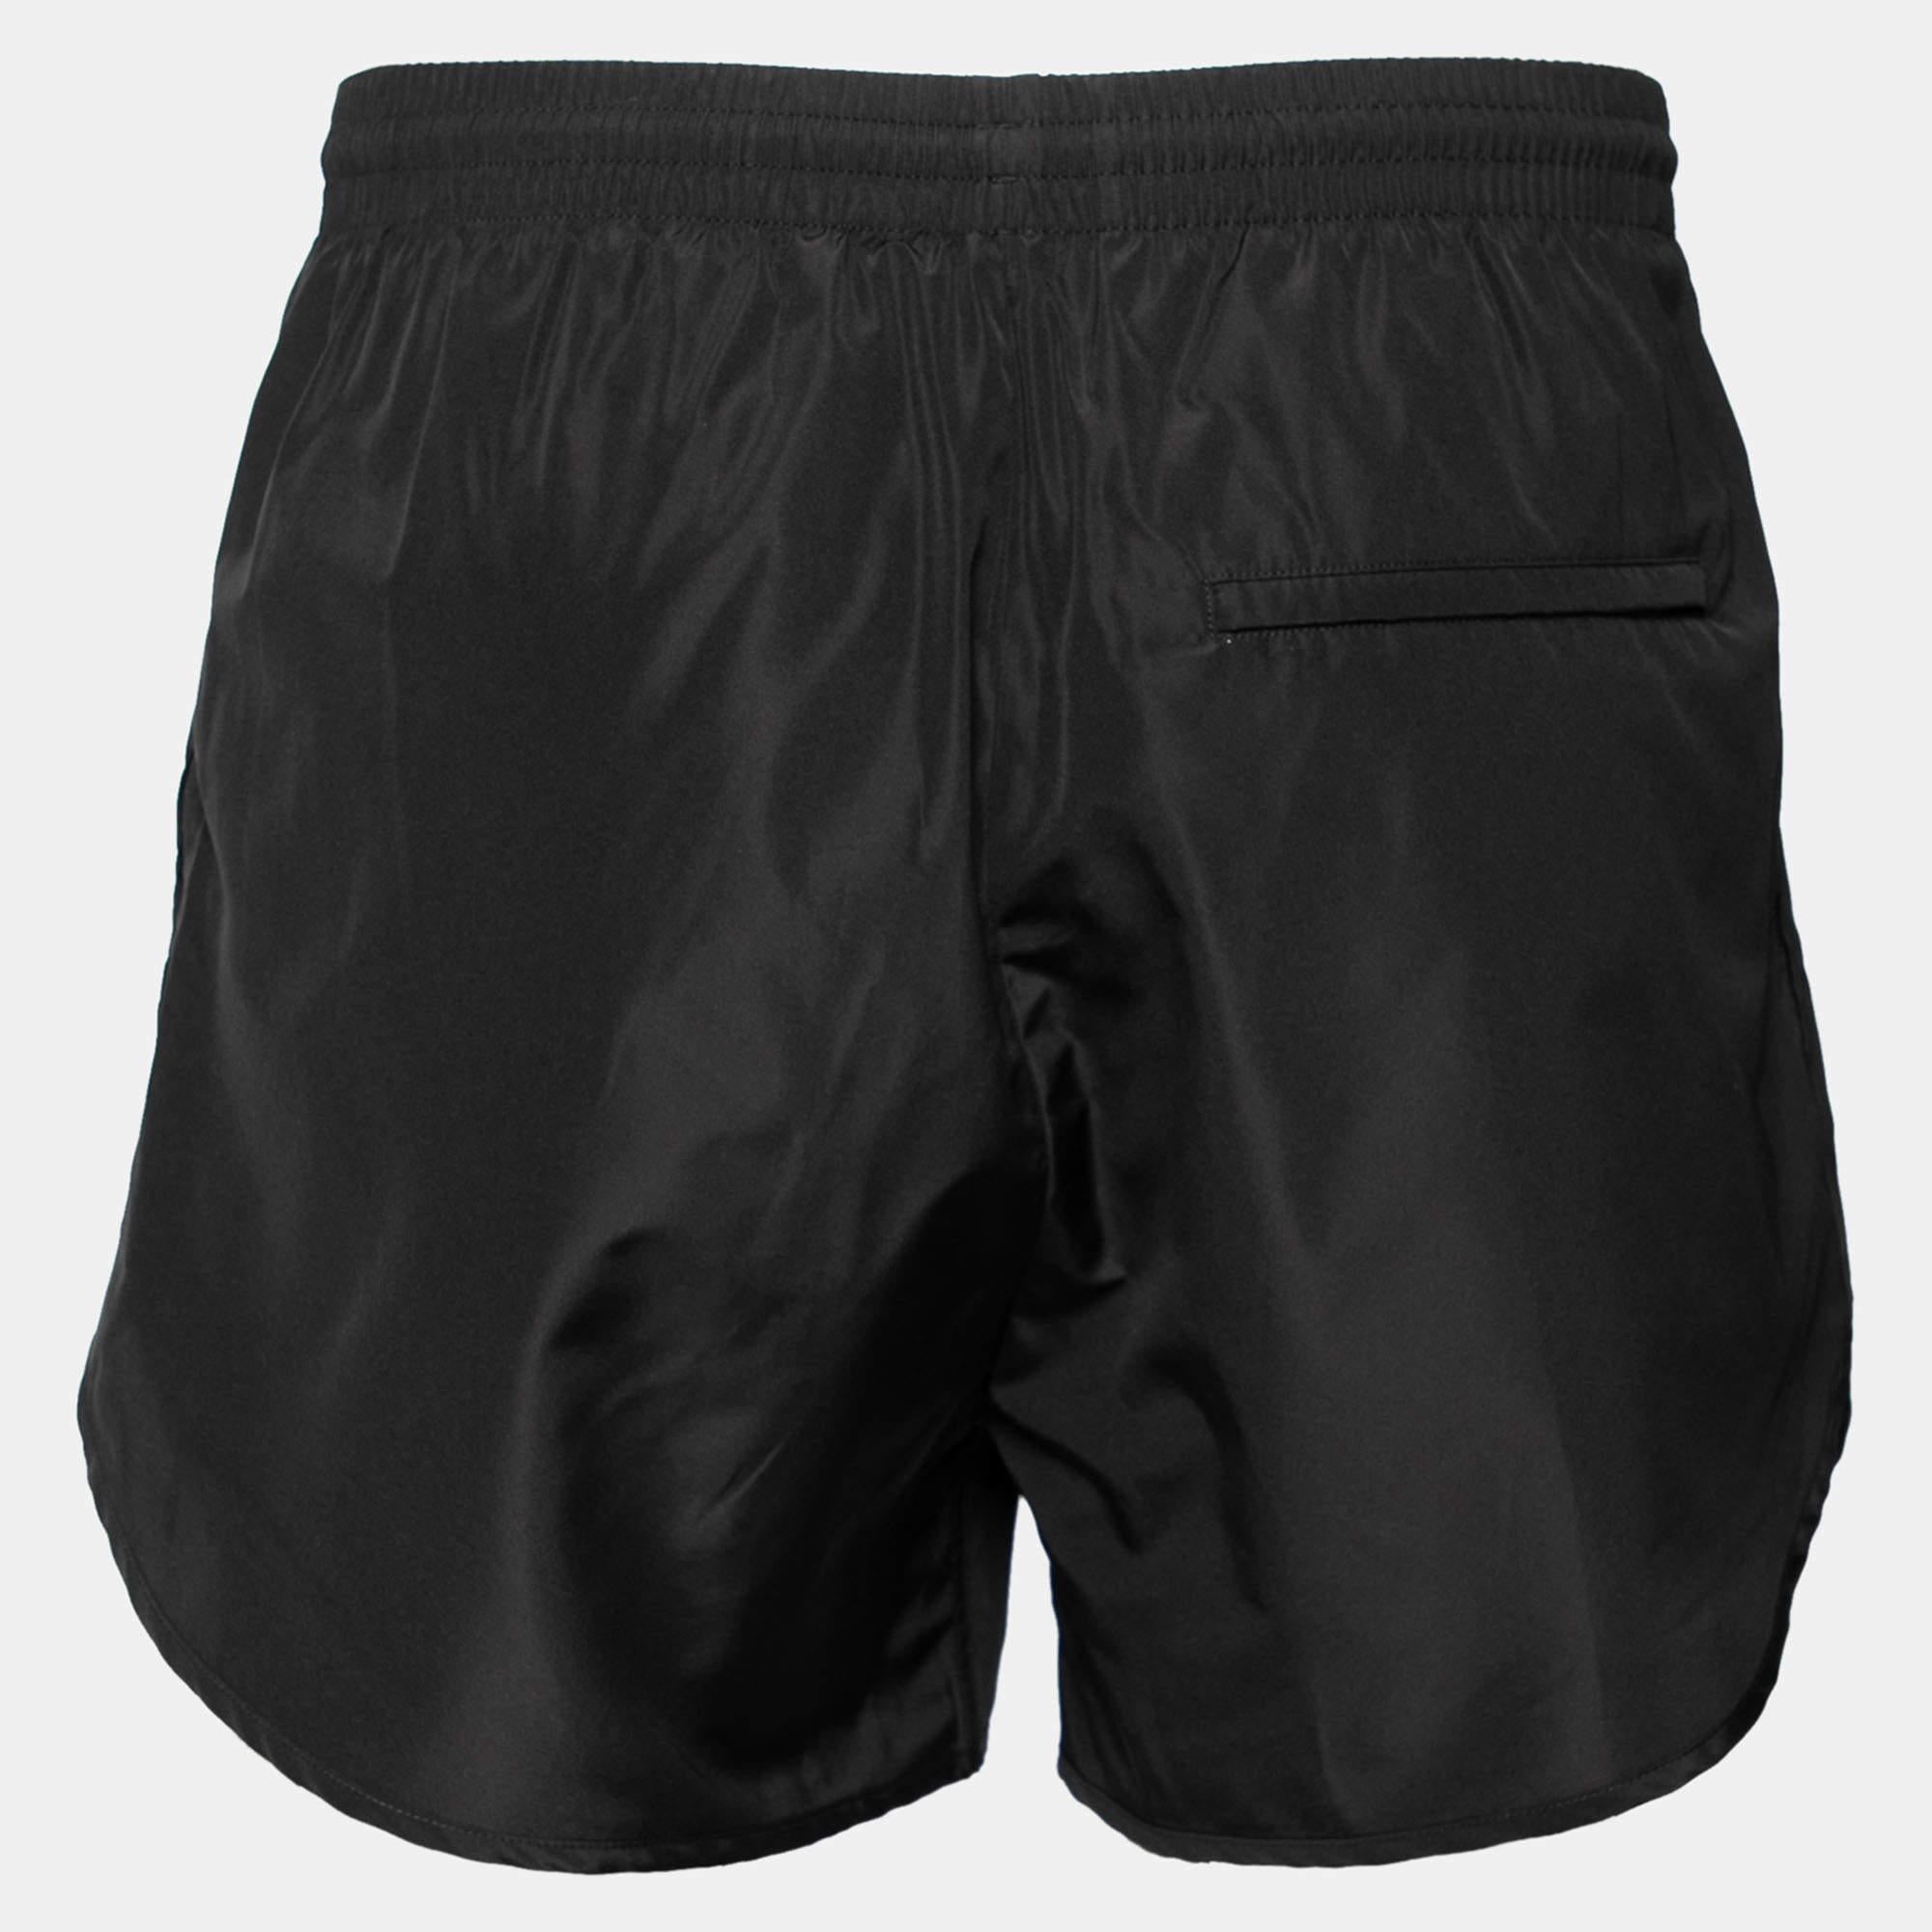 Whether you want to just lounge around, go out to run errands, or play outdoor sports, these Balenciaga basketball shorts will be a stylish pick and will make you feel comfortable all day. It has been made using high-grade materials and the creation